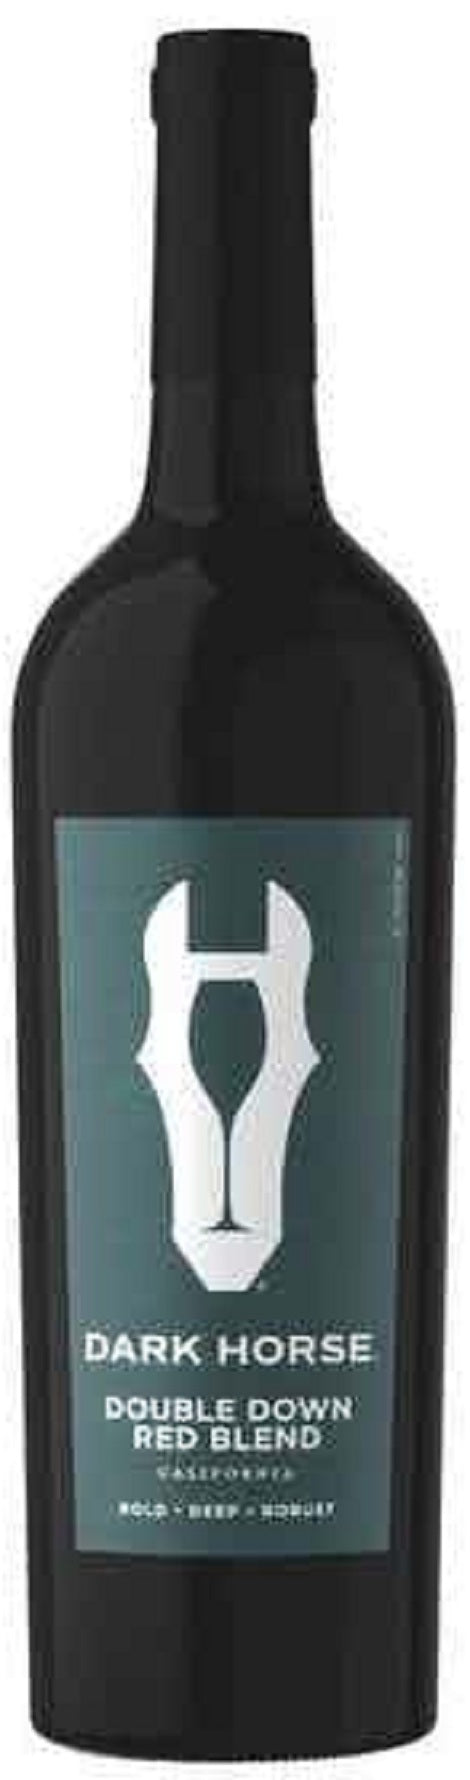 Dark Horse Red Blend Double Down 2015